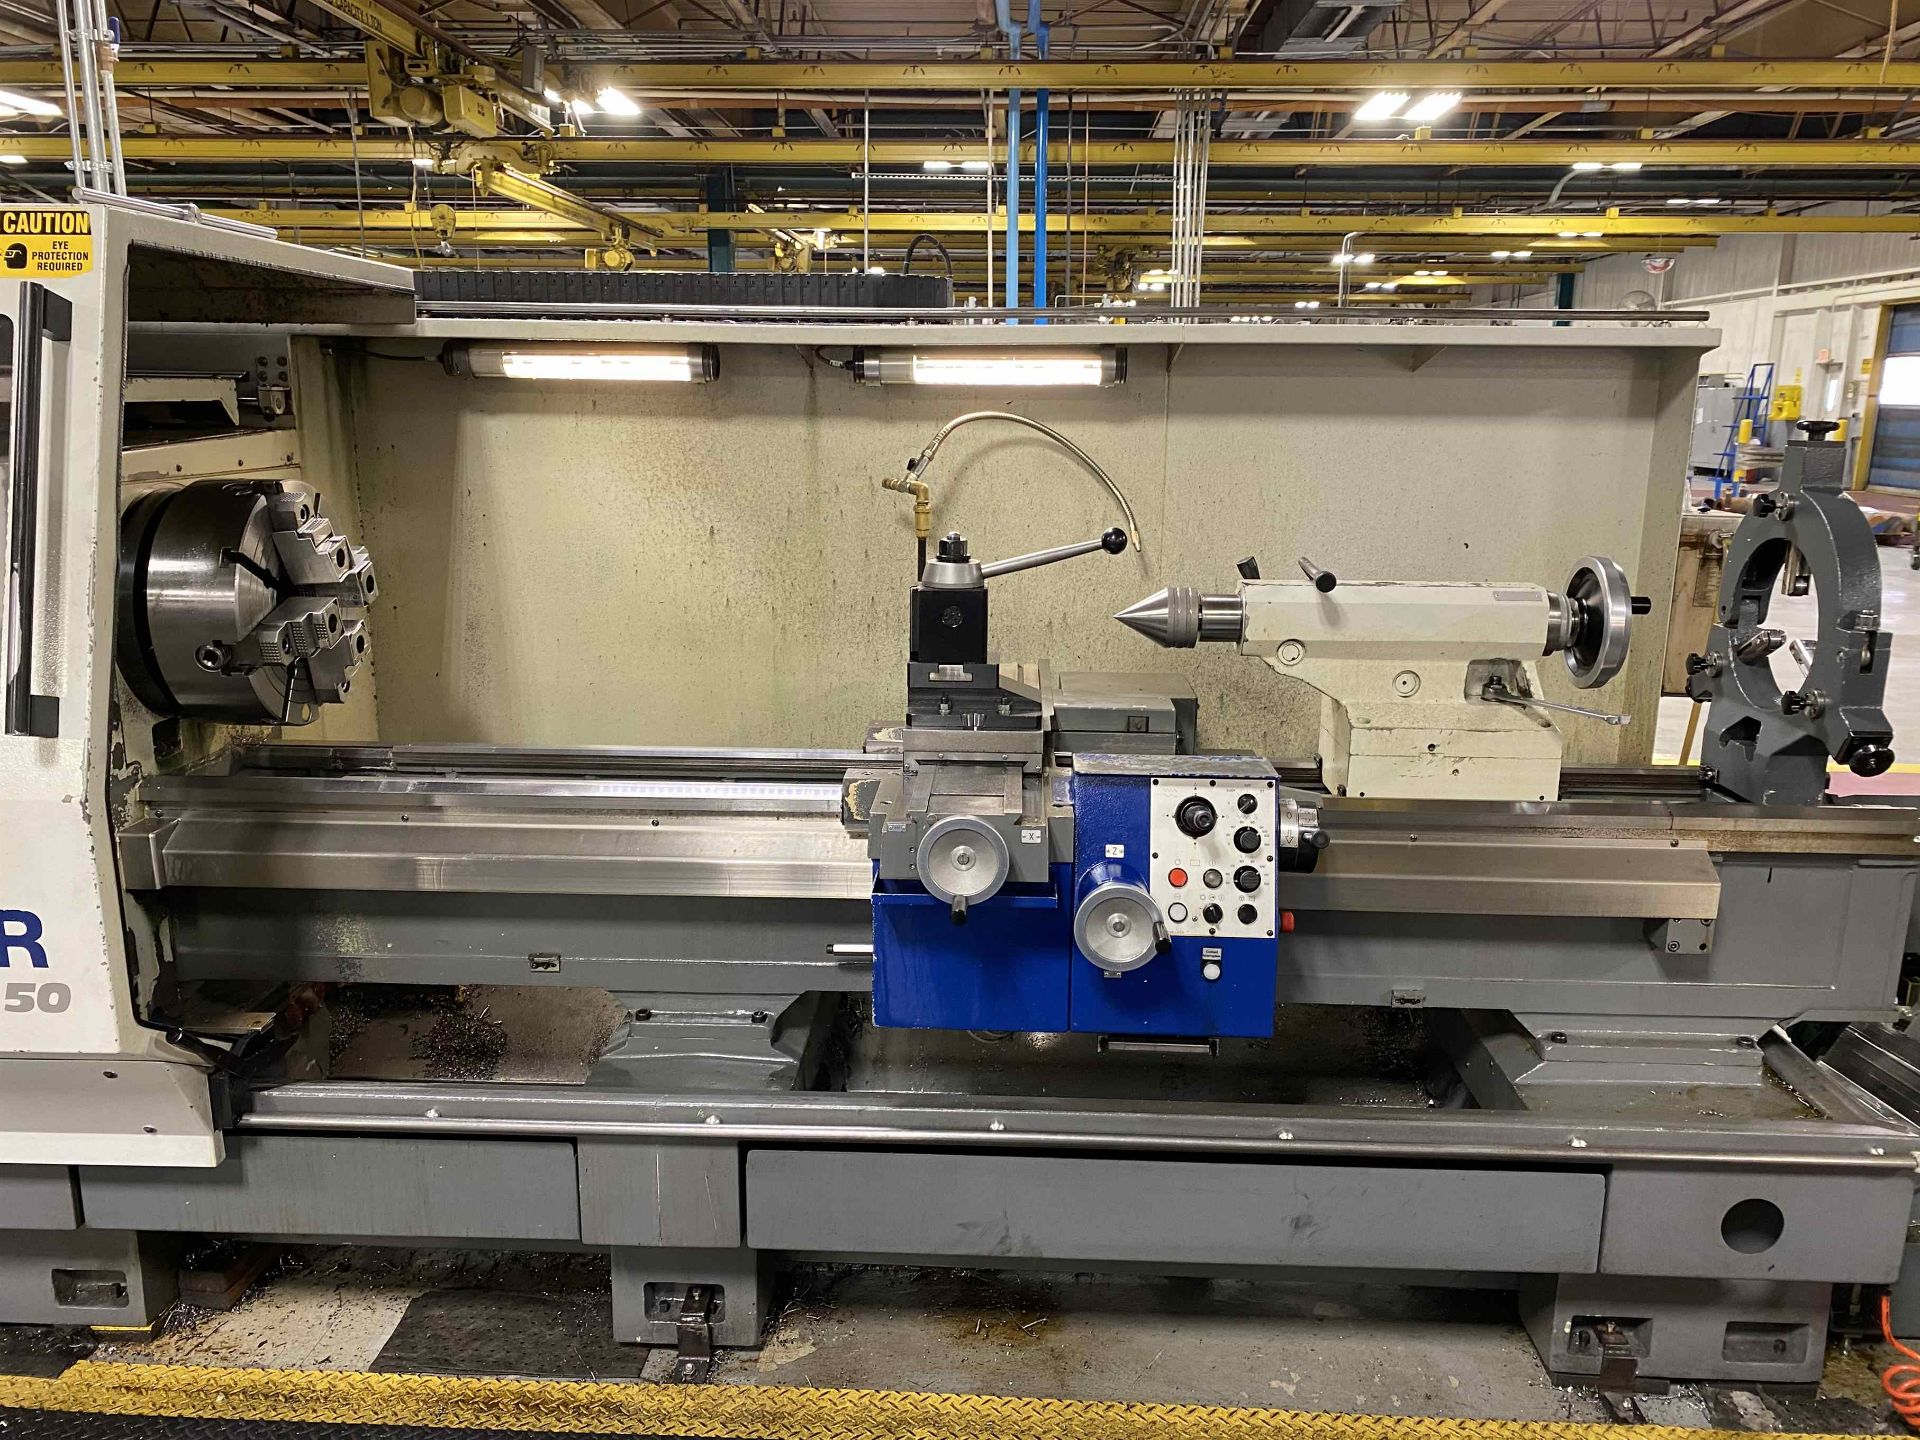 2012 WEILER E50 Cycle-Controlled Lathe, s/n HD02, w/ WEILER CONTROL, 16" 4 Jaw Chuck, 80" Centers - Image 9 of 10